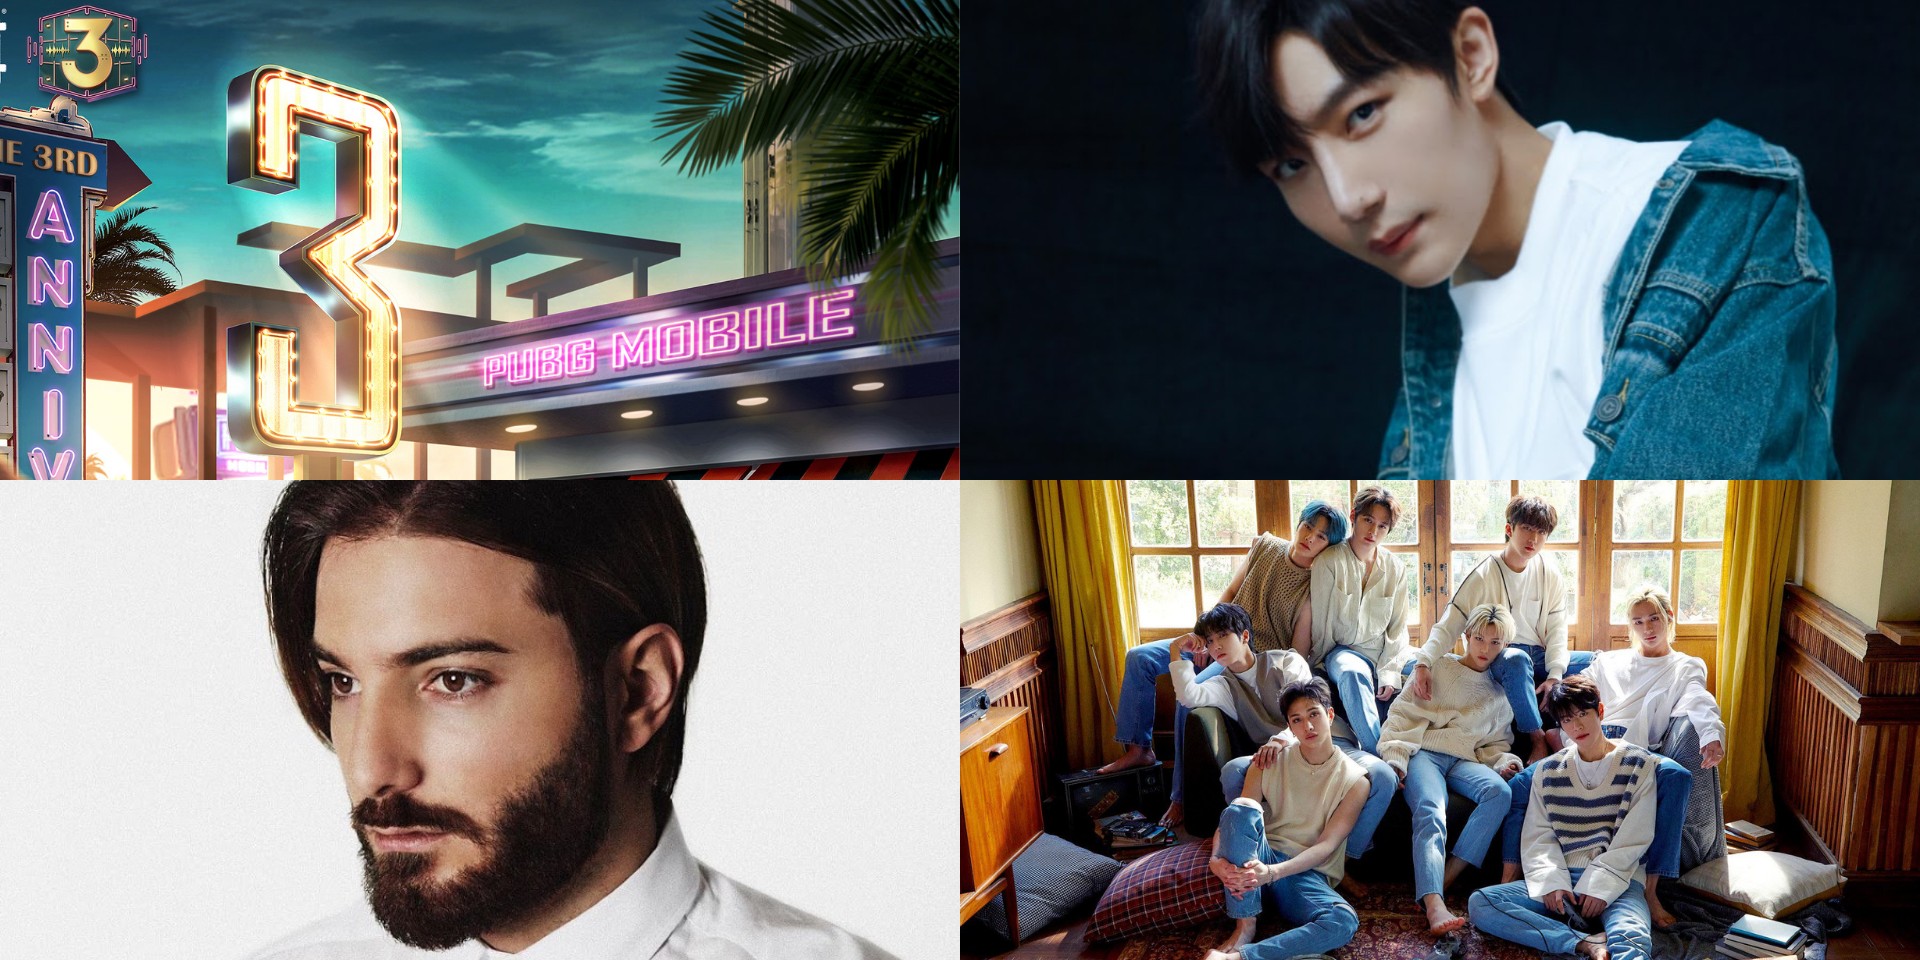 Stray Kids, Alesso, and CORSAK team up for PUBG Mobile track, 'Going Dumb' – listen